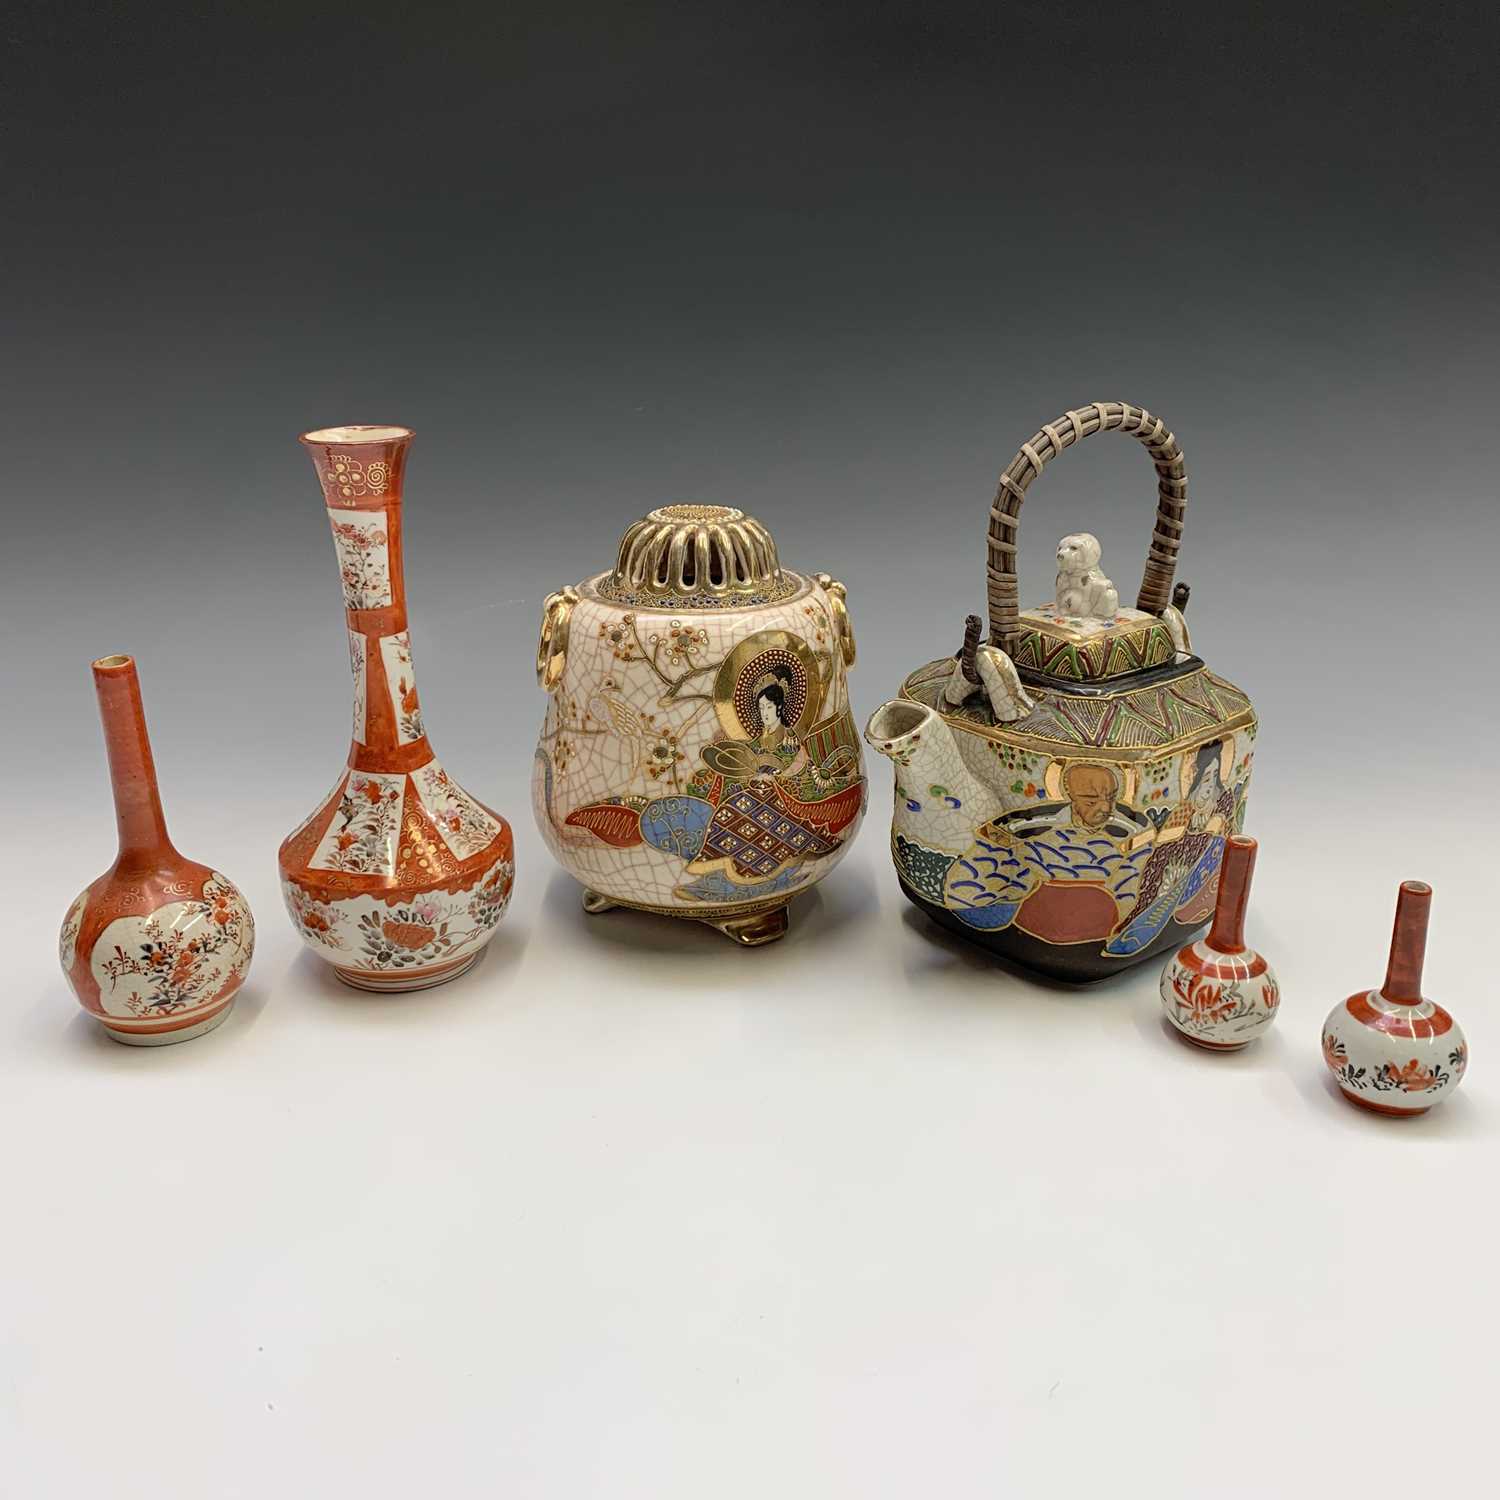 Four assorted Japanese Kutani vases, the largest 22cm, together with a Japanese teapot and a jar and